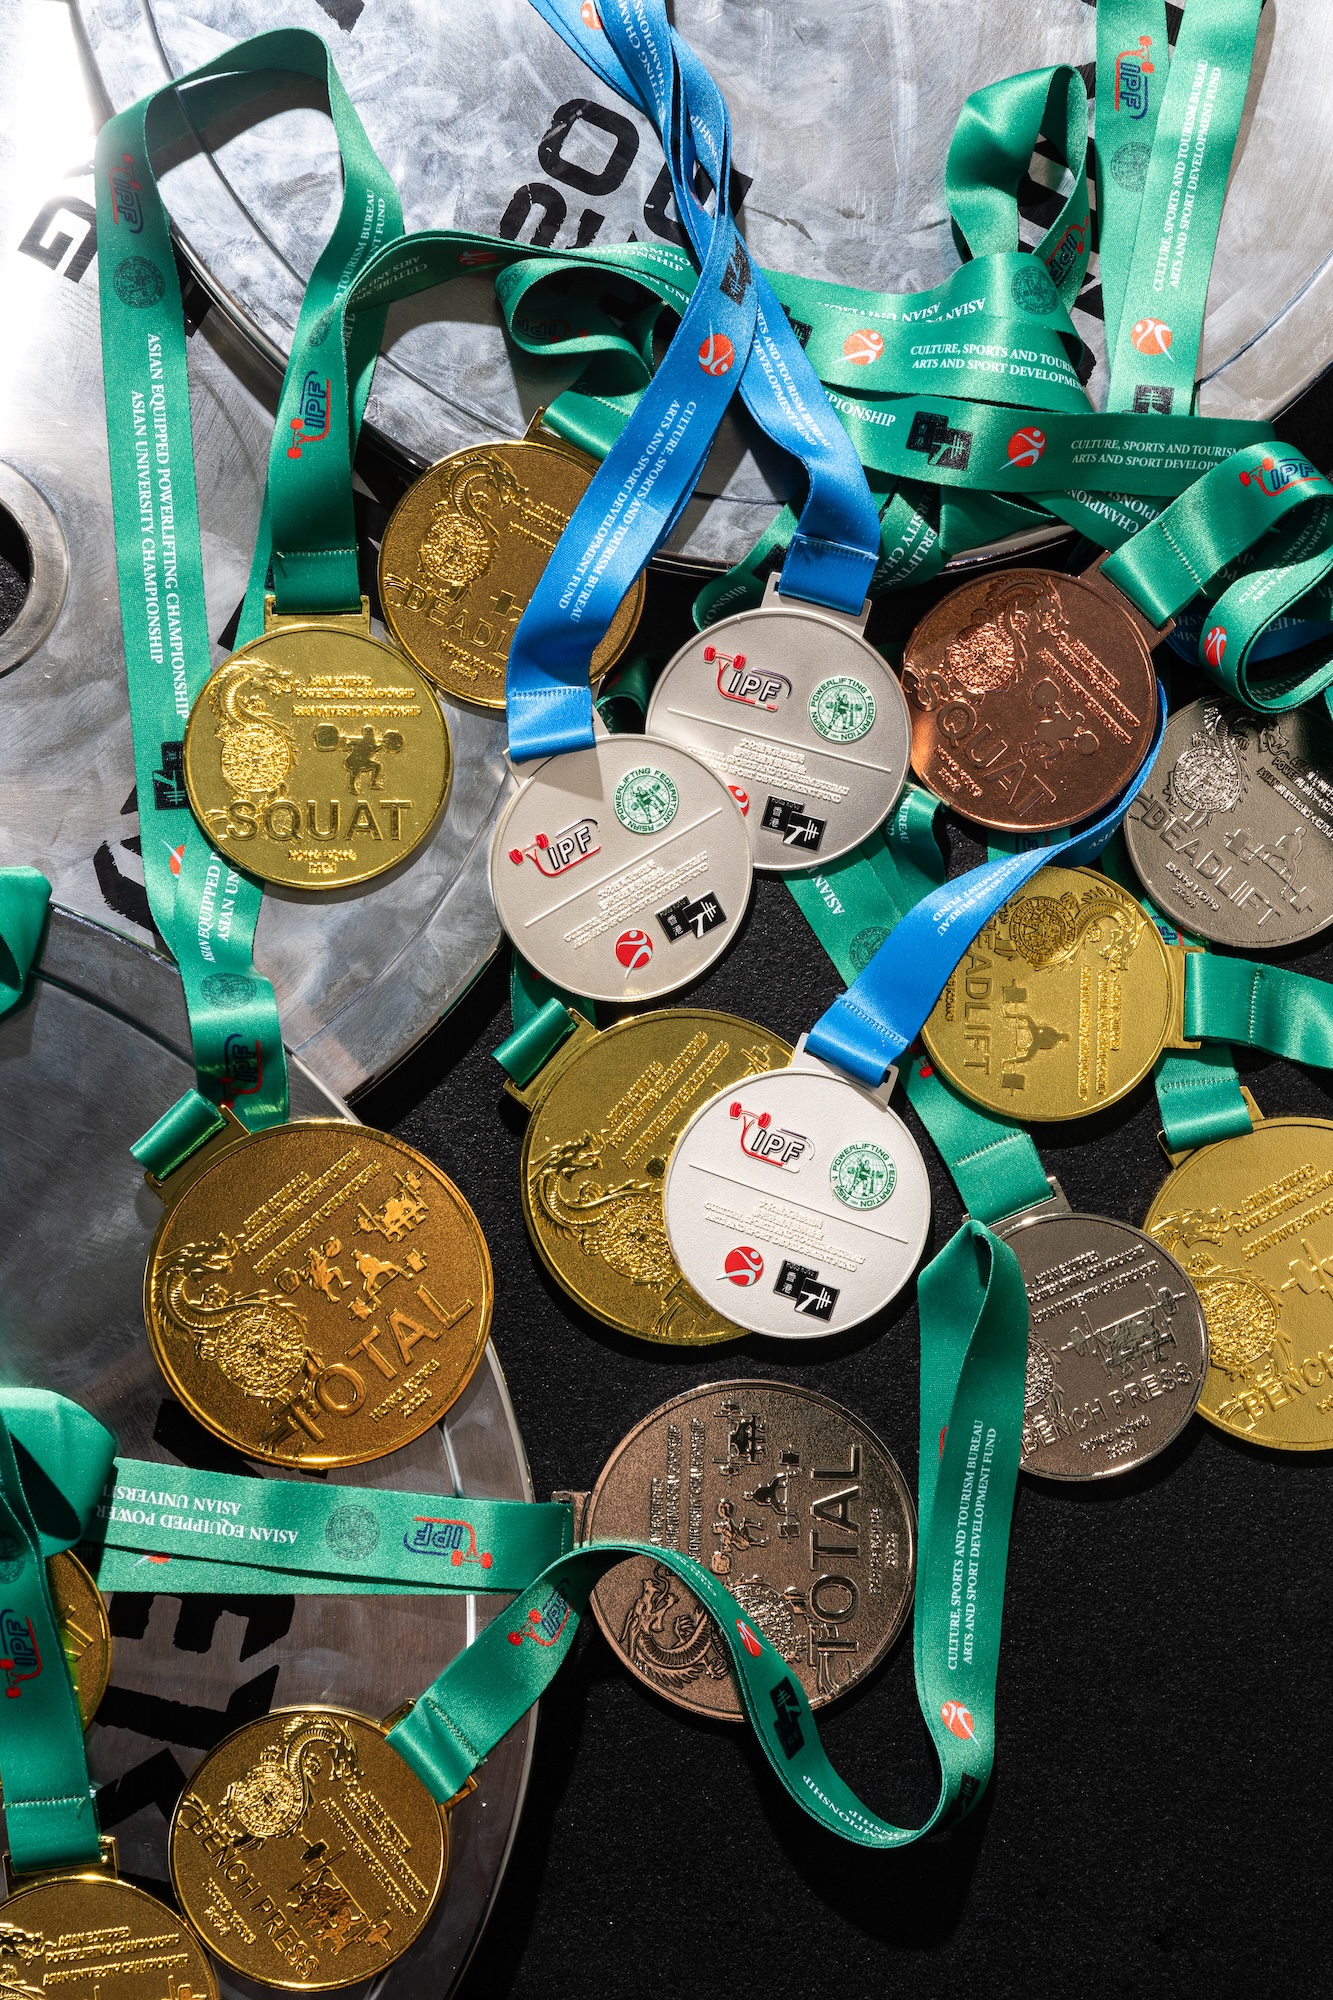 Some of the medals the promising powerlifter has earned